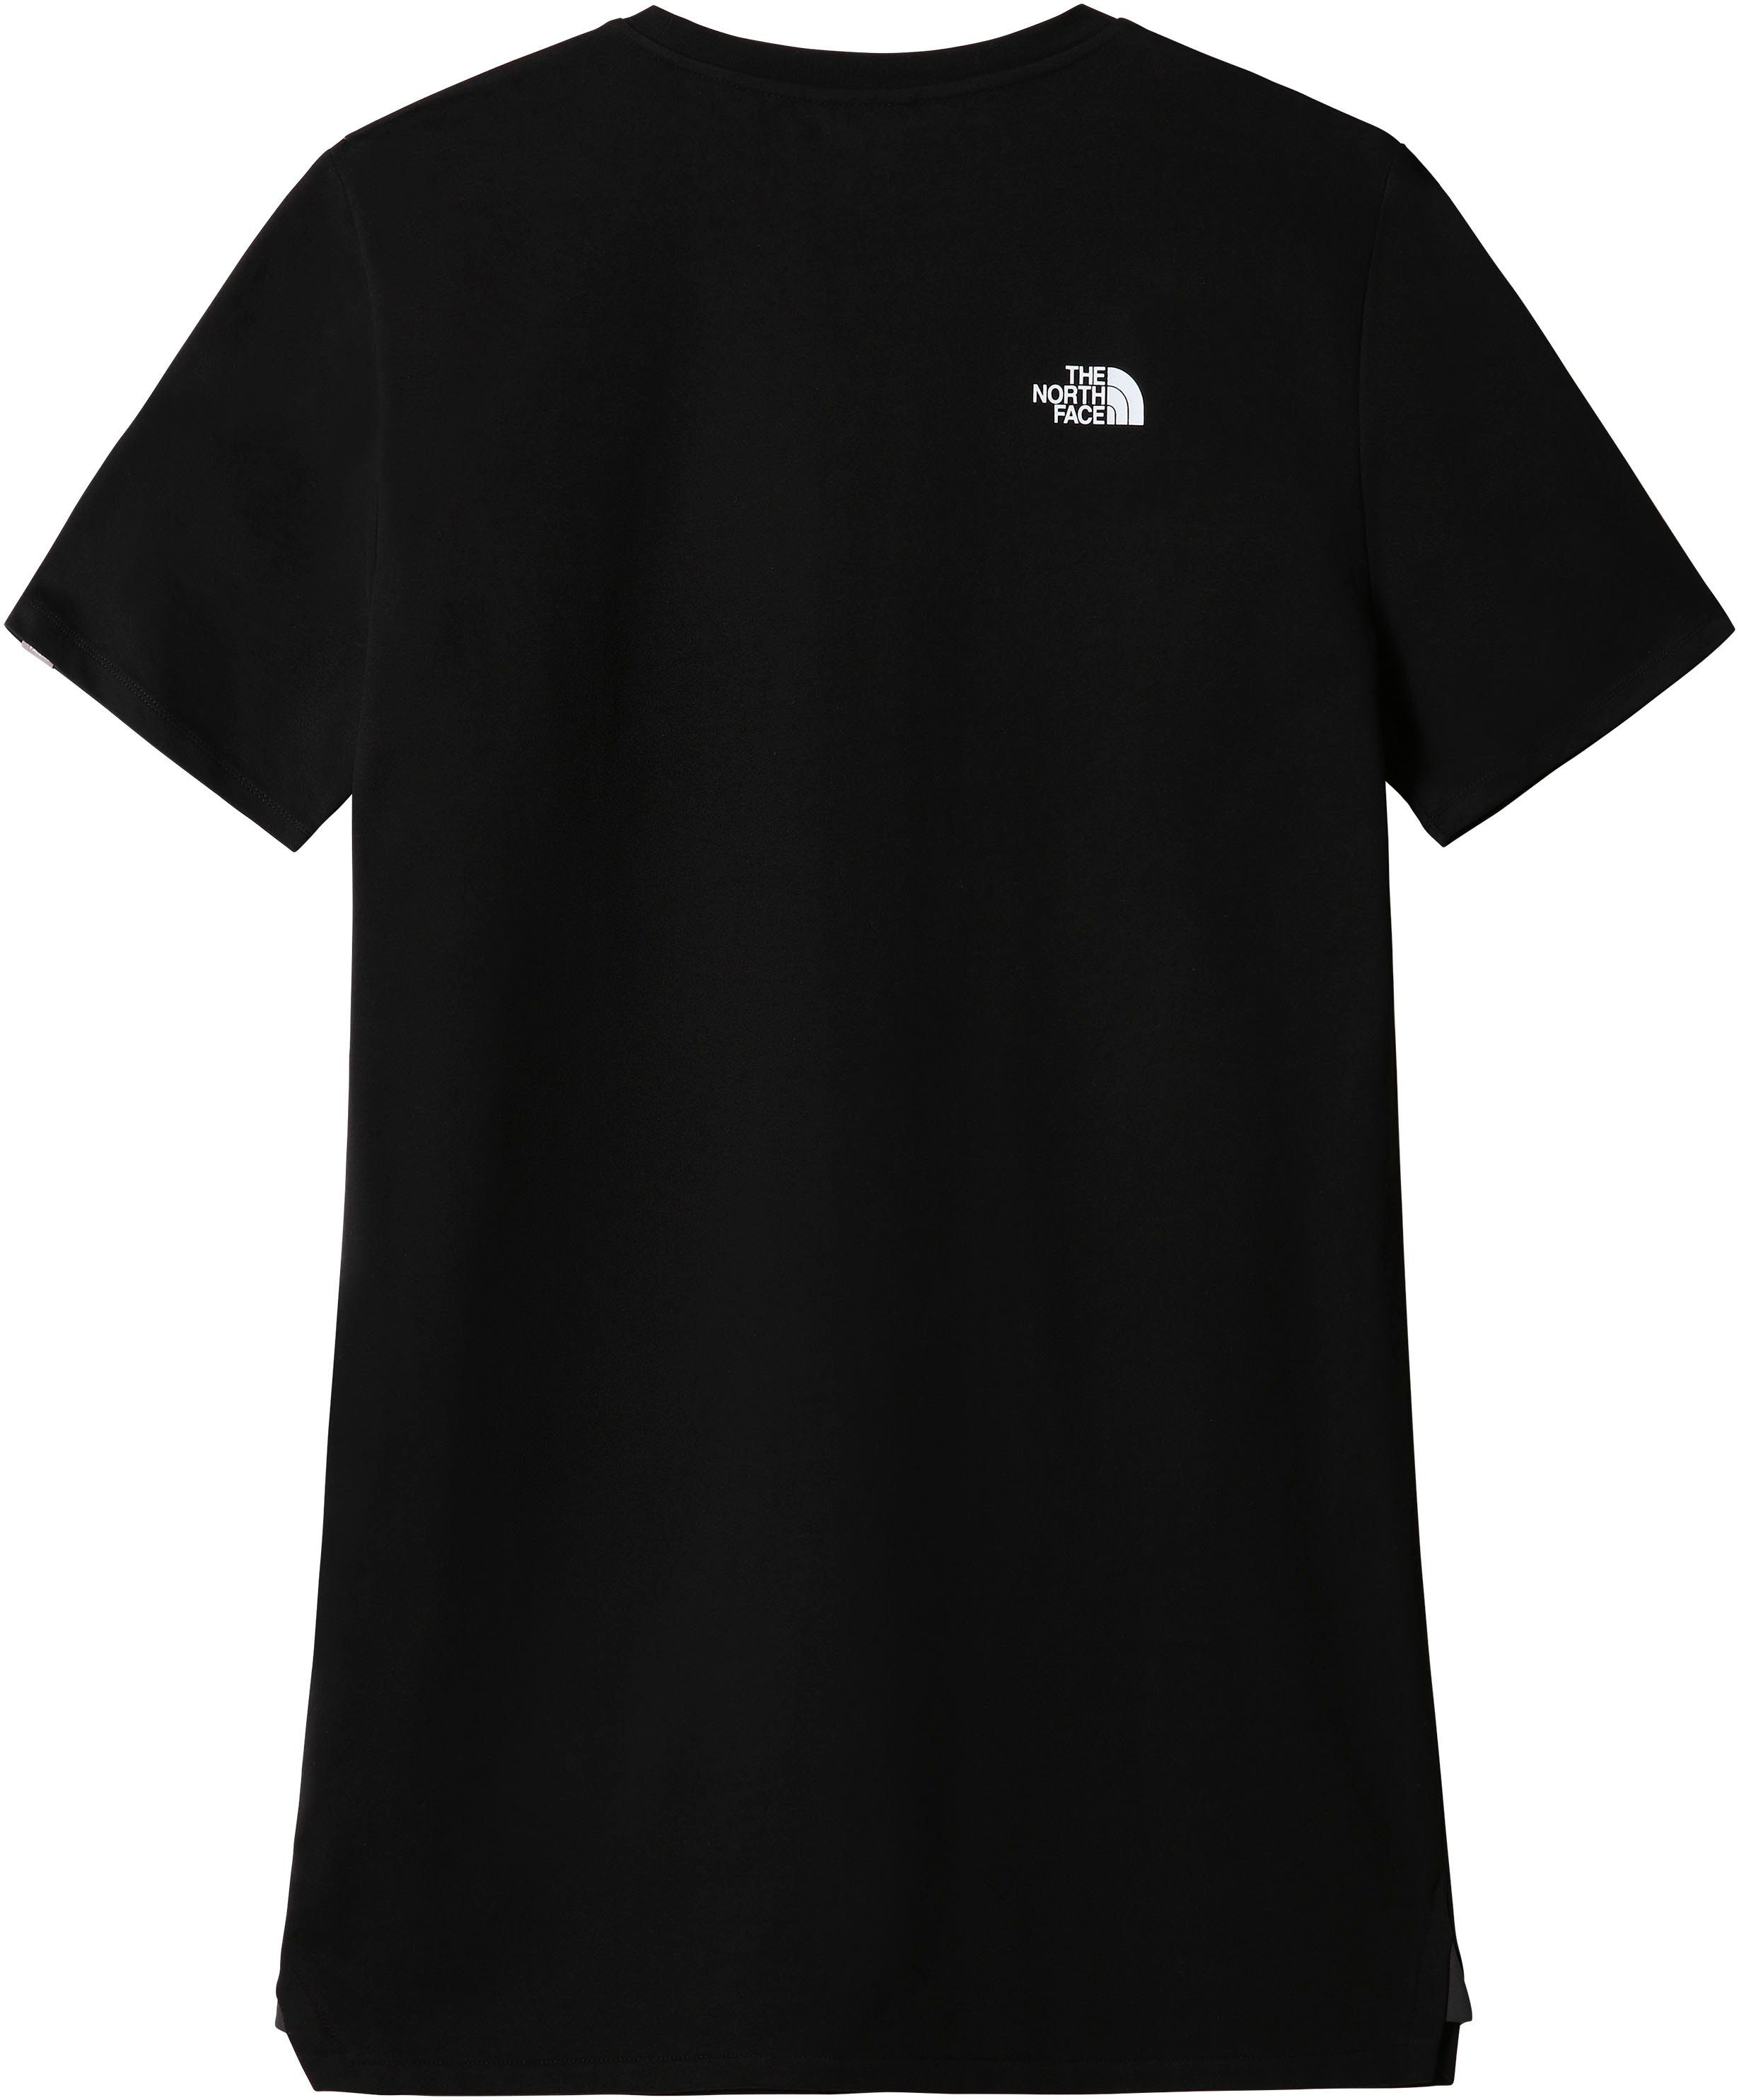 The North Face W PLUS SIMPLE DOME DRESS TEE Sommerkleid